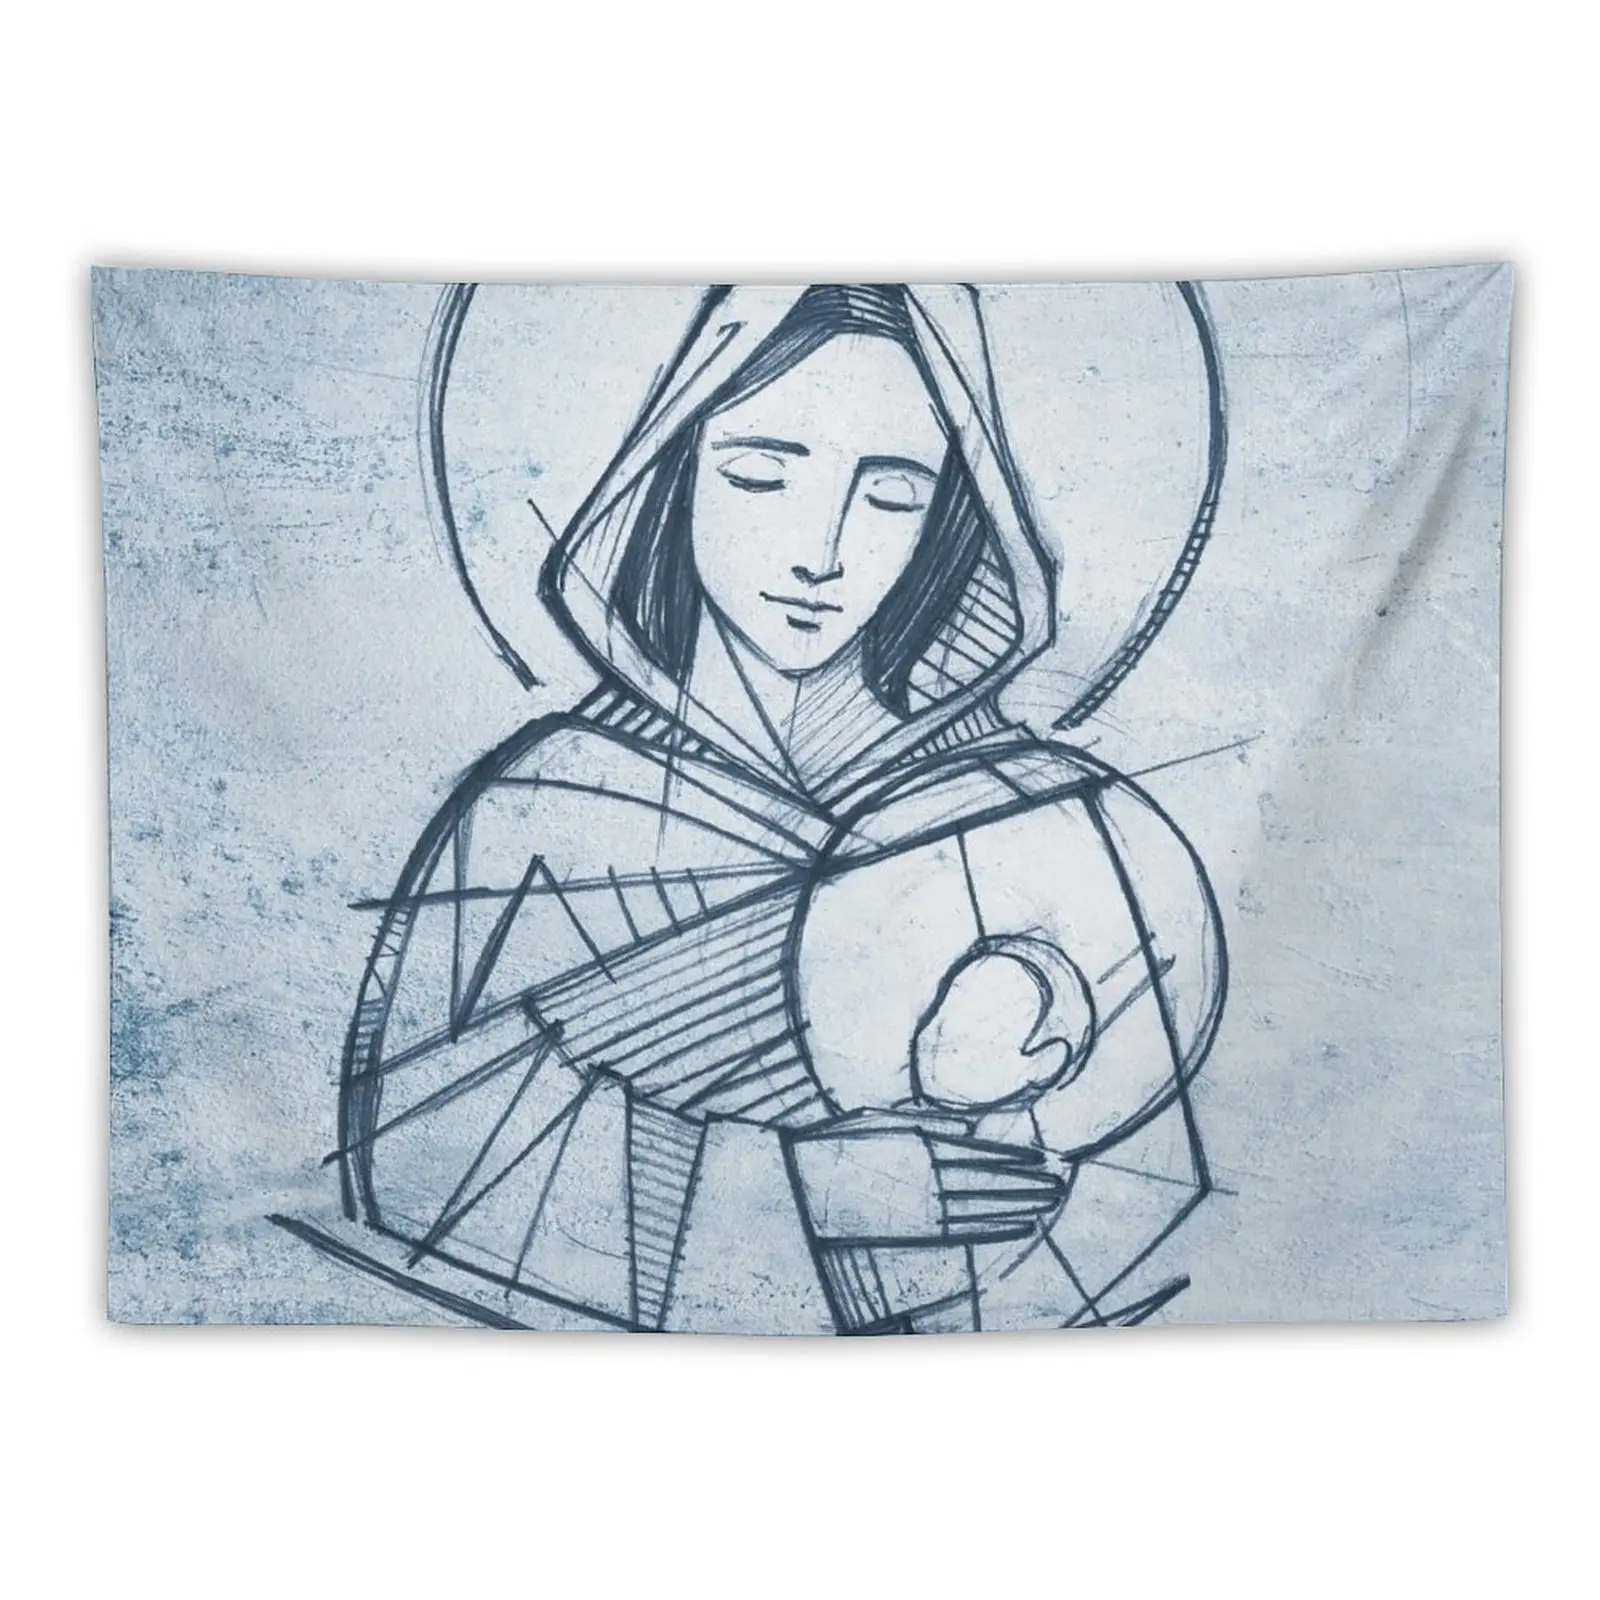 

New Virgin Mary and baby Jesus hand drawn pencil illustration Tapestry Tapestry Wall Hanging Carpet On The Wall Cute Room Things